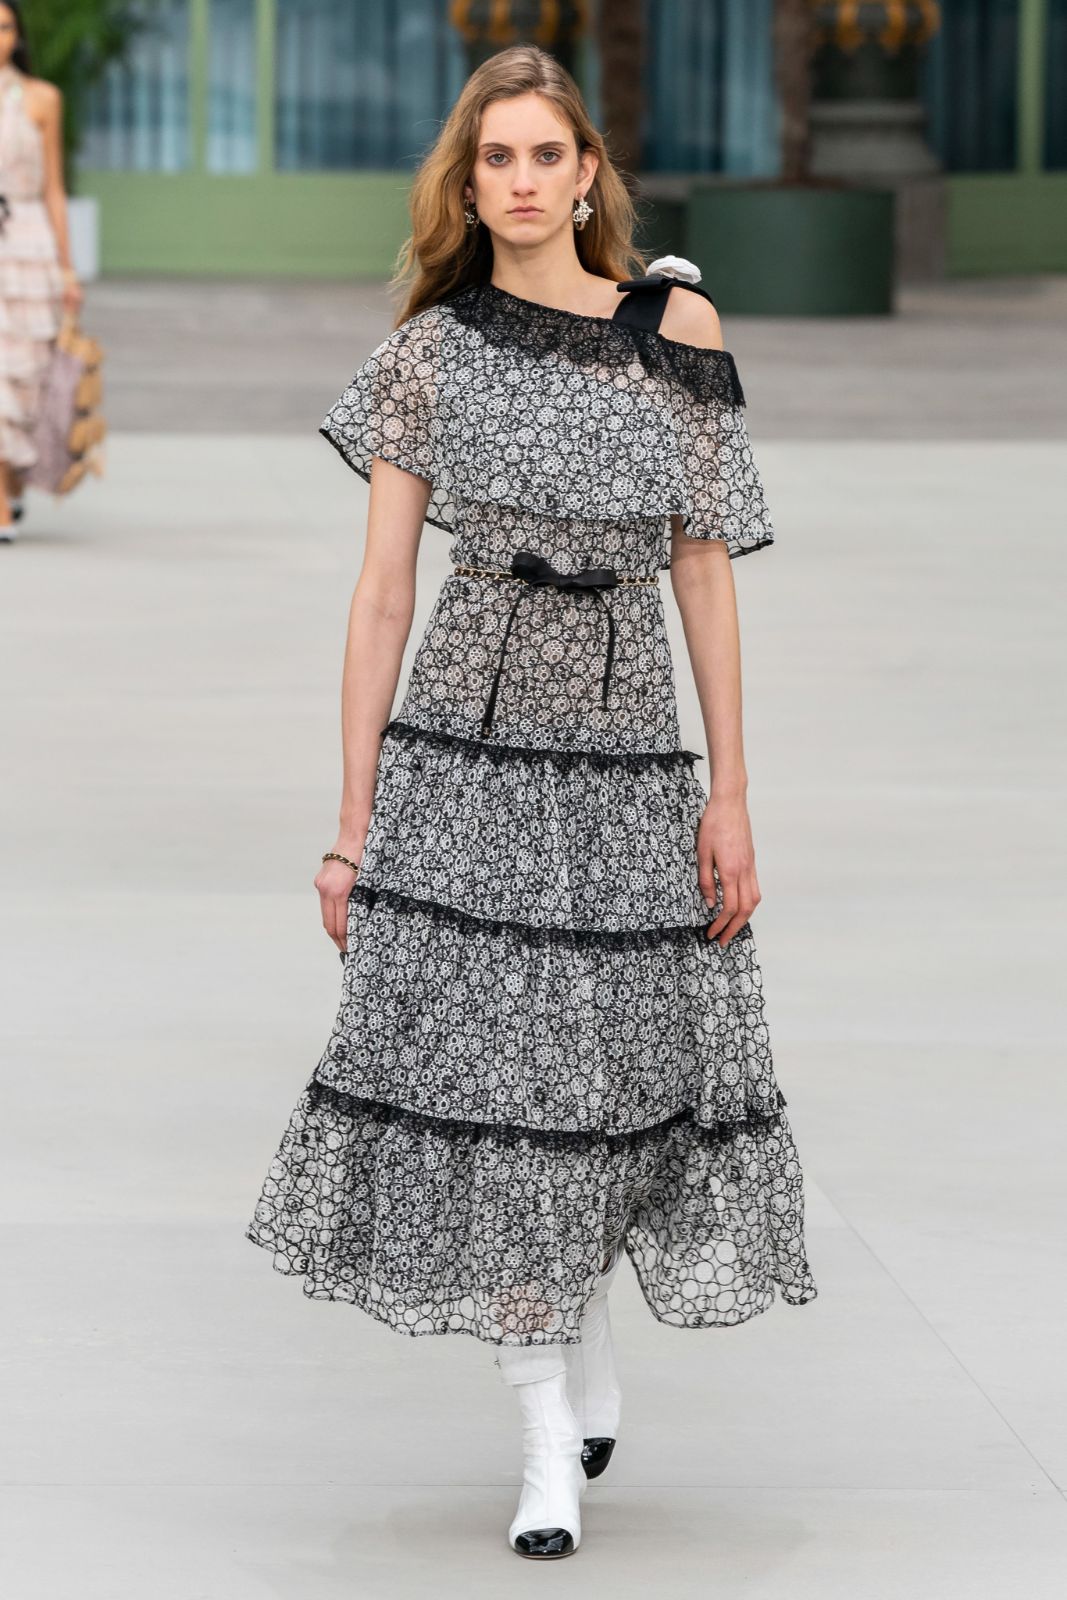 Chanel Debuts Virginie Viard's First Solo Collection for Resort 2020 –  Vogue Hong Kong